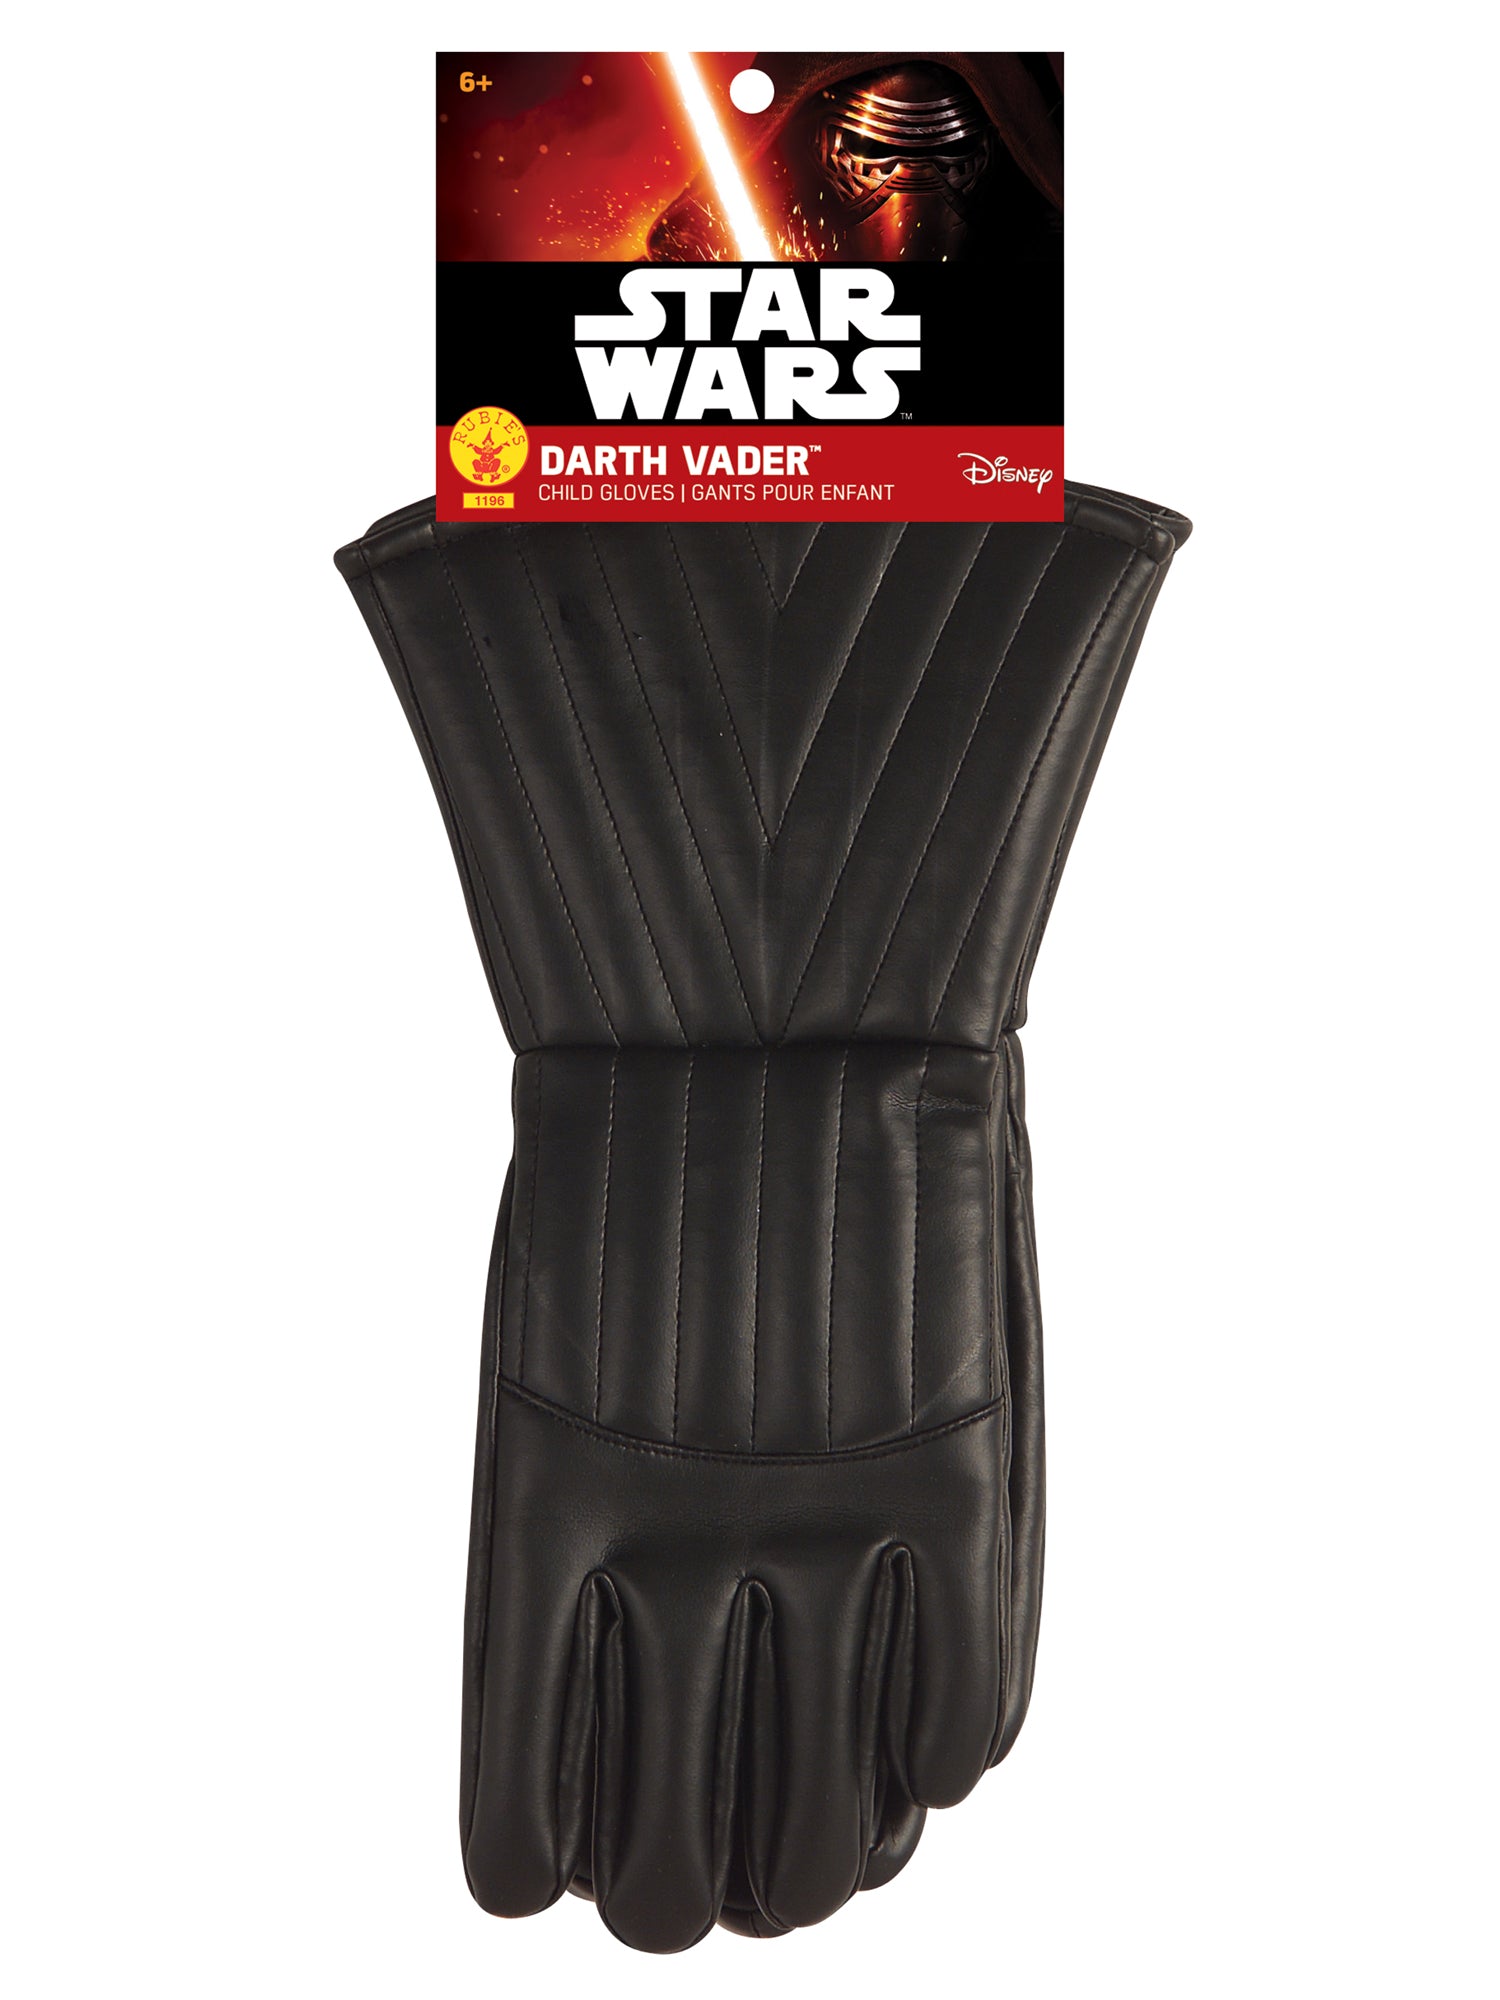 Darth Vader, Revenge Of The Sith, Episode III, Revenge Of The Sith, Multi, Star Wars, Accessories, One Size, Front